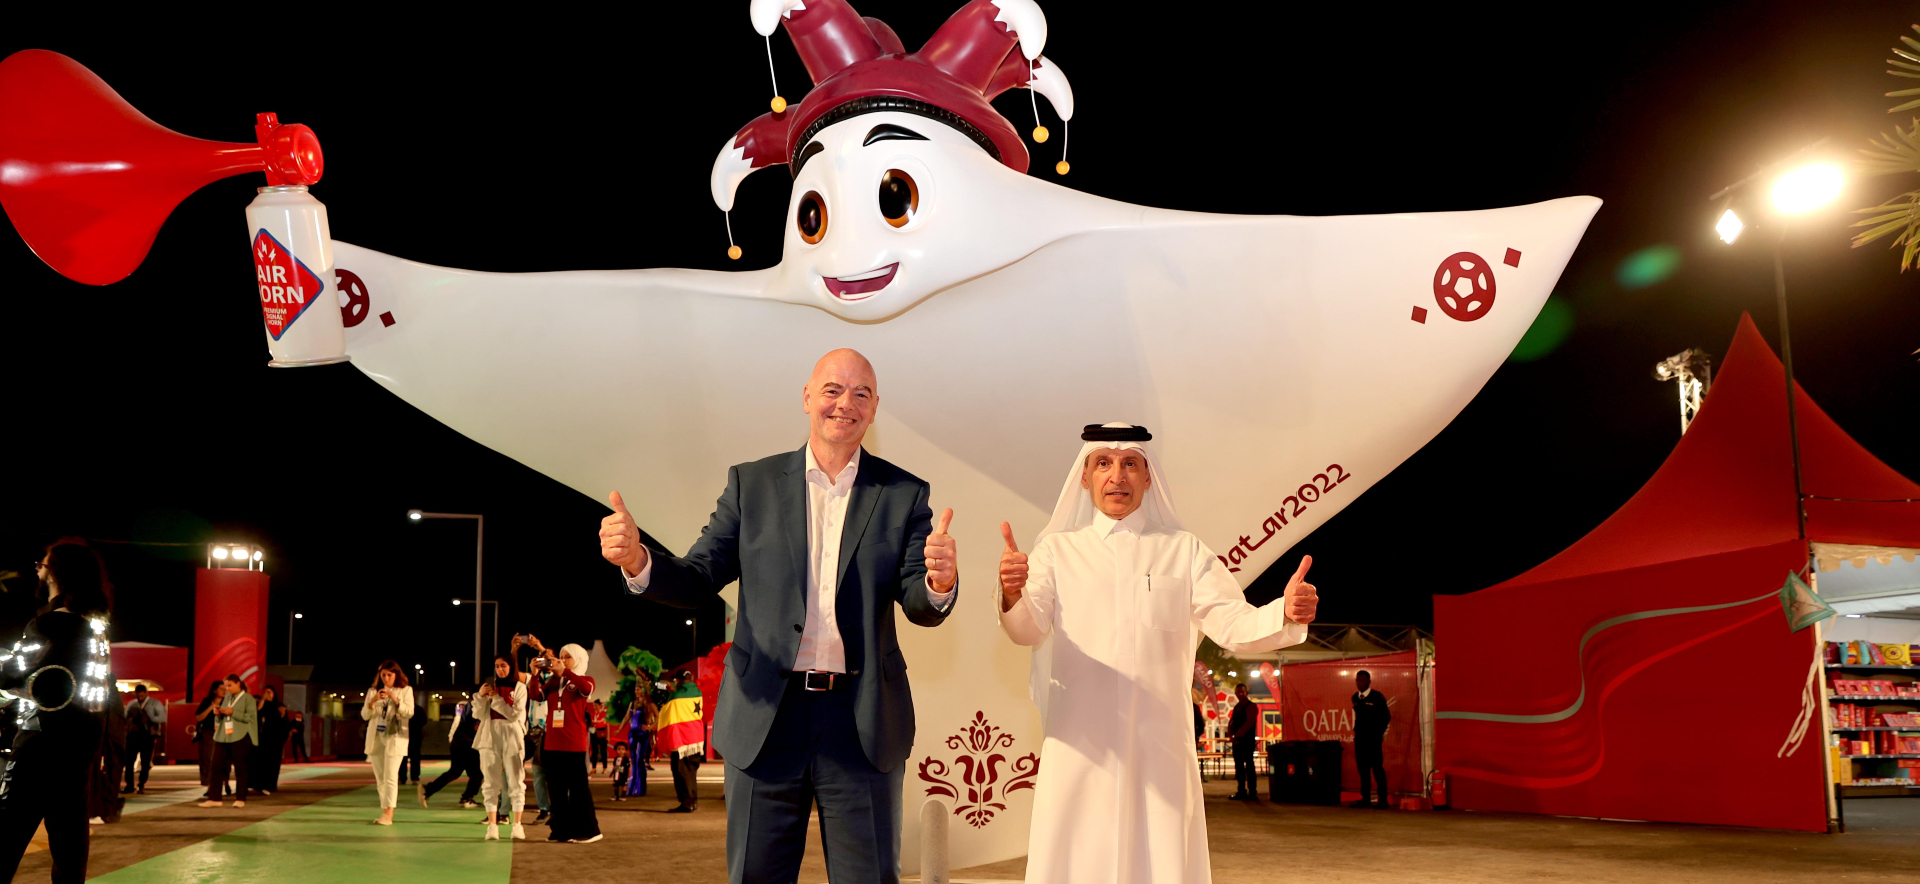 Qatar Airways Dedicates Song To Fans - Unveils Fun-Filled Experiences